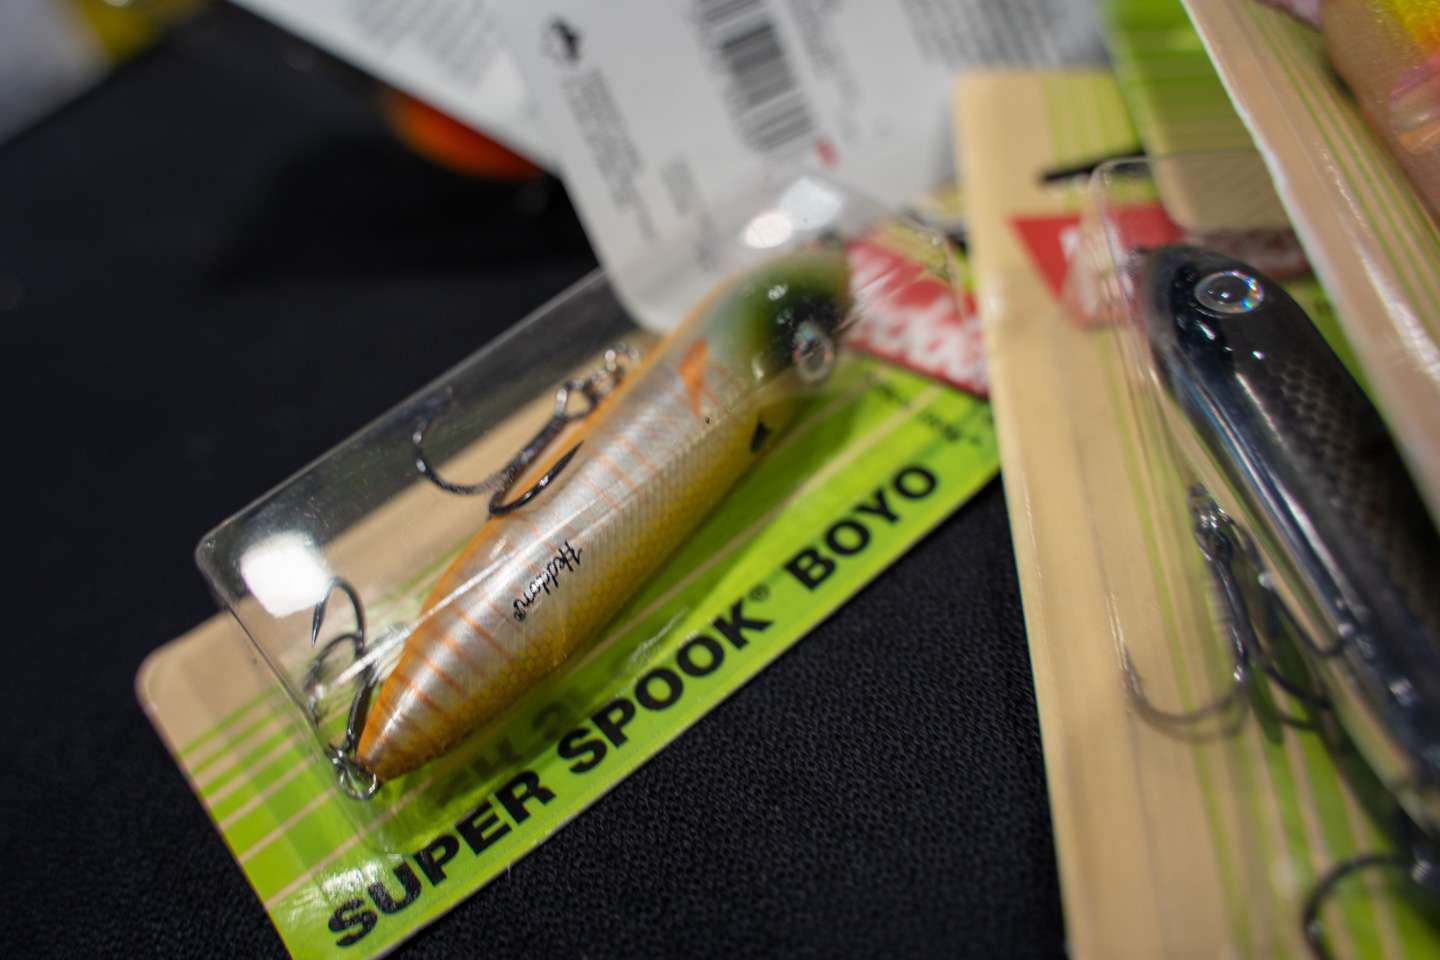 In certain parts of the country, bass feed on smaller baitfish and imitating that size of baitfish is tricky. The Super Spook BOYO will be a great addition to your topwater arsenal for imitating smaller minnows and bluegill. Keep this topwater in mind when the fish start schooling on your favorite body of water. 